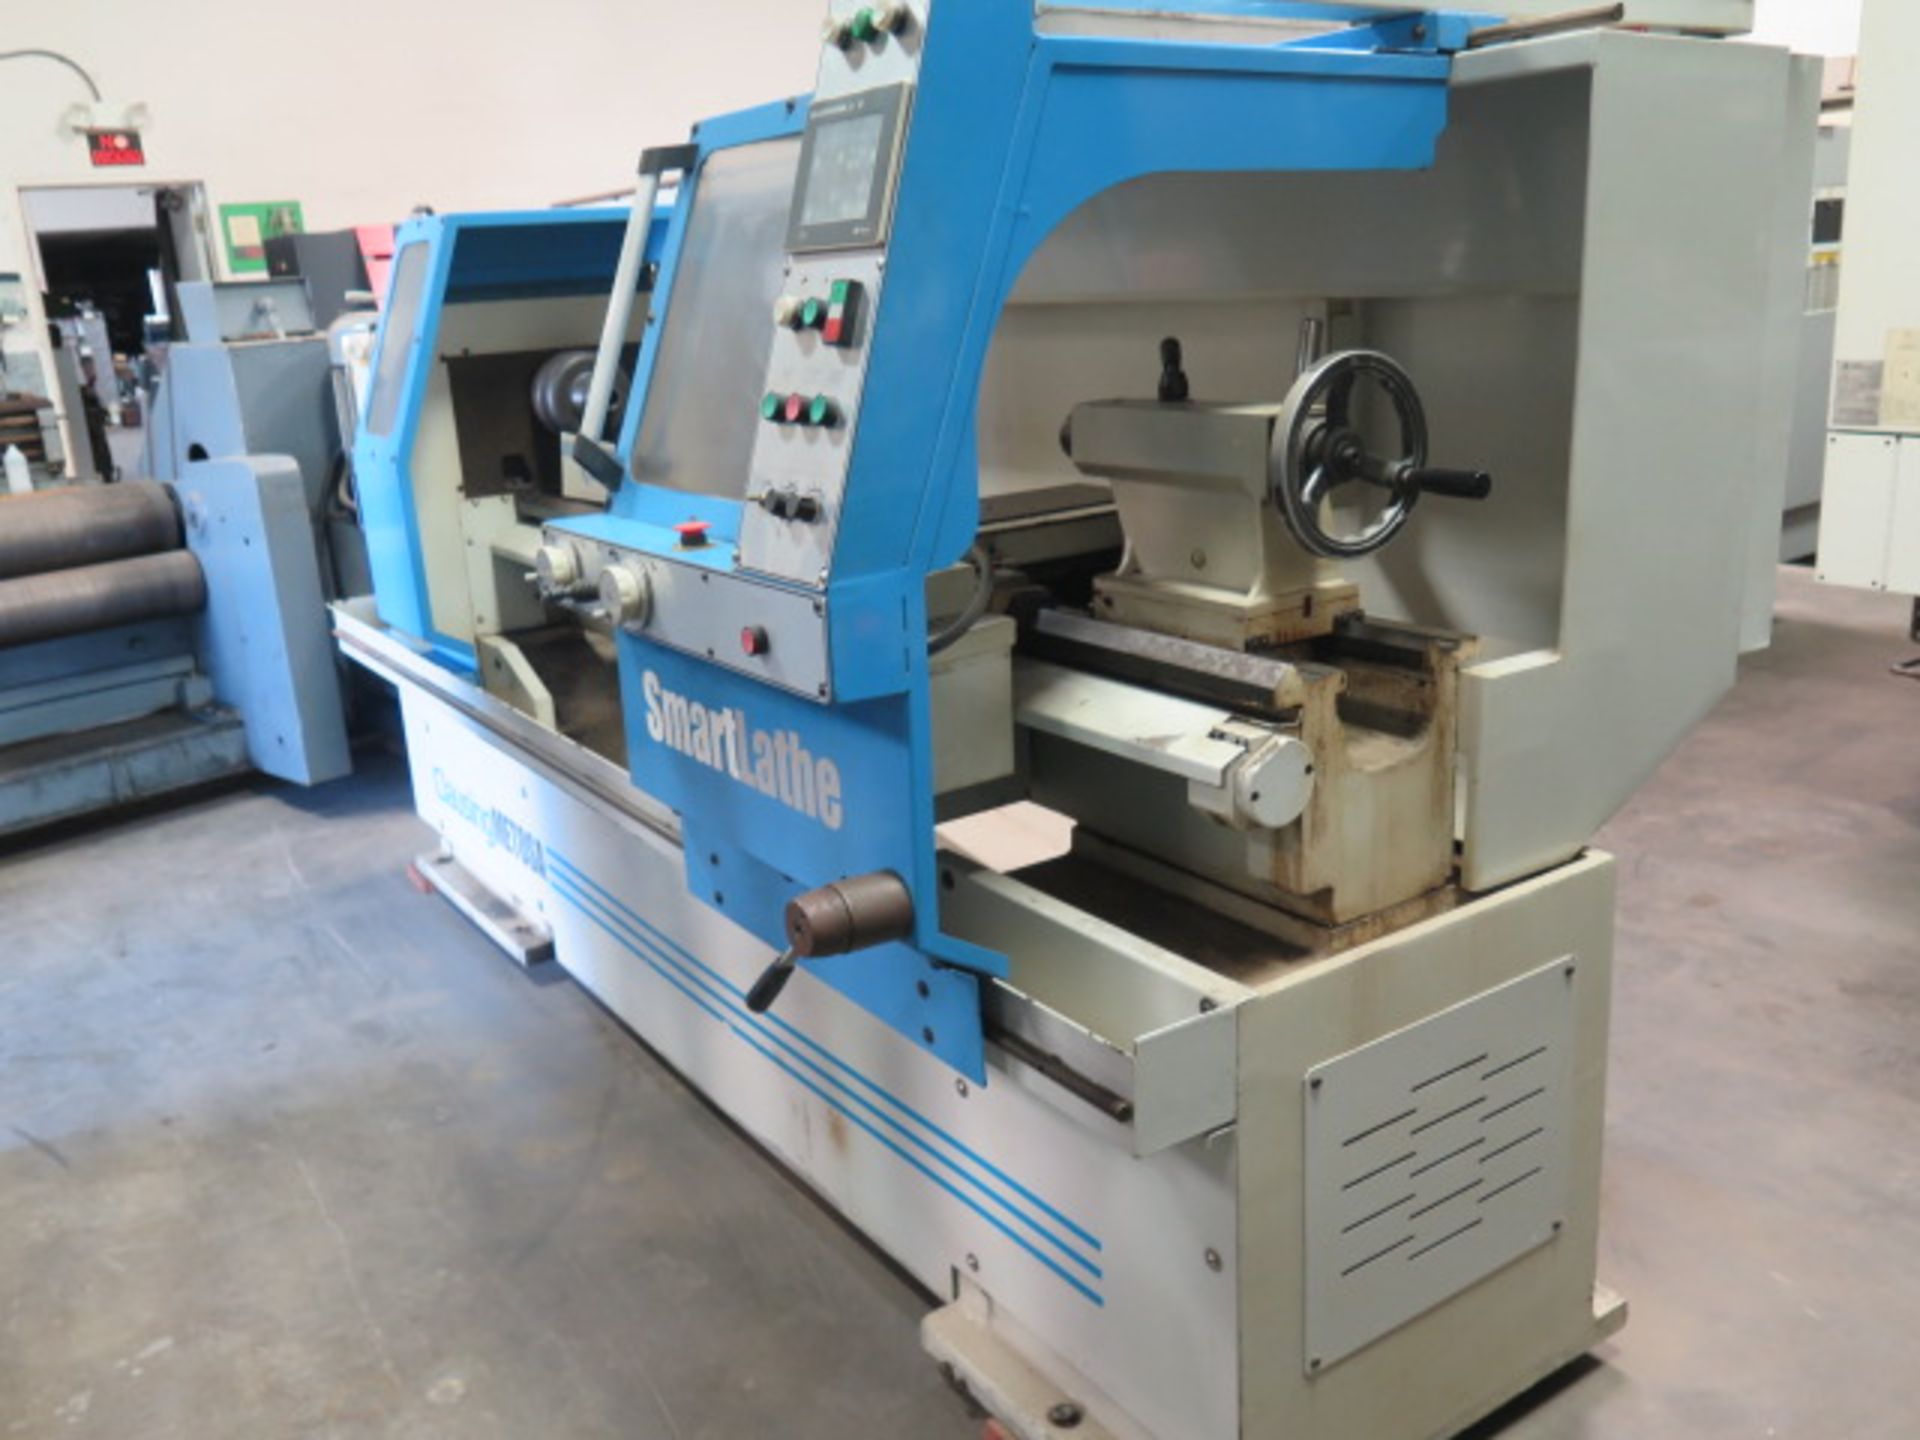 2001 Clausing Metosa SM1560VS 15” x 60” “Smart Lathe” Soft CNC Gap Bed lathe, SOLD AS IS - Image 4 of 14